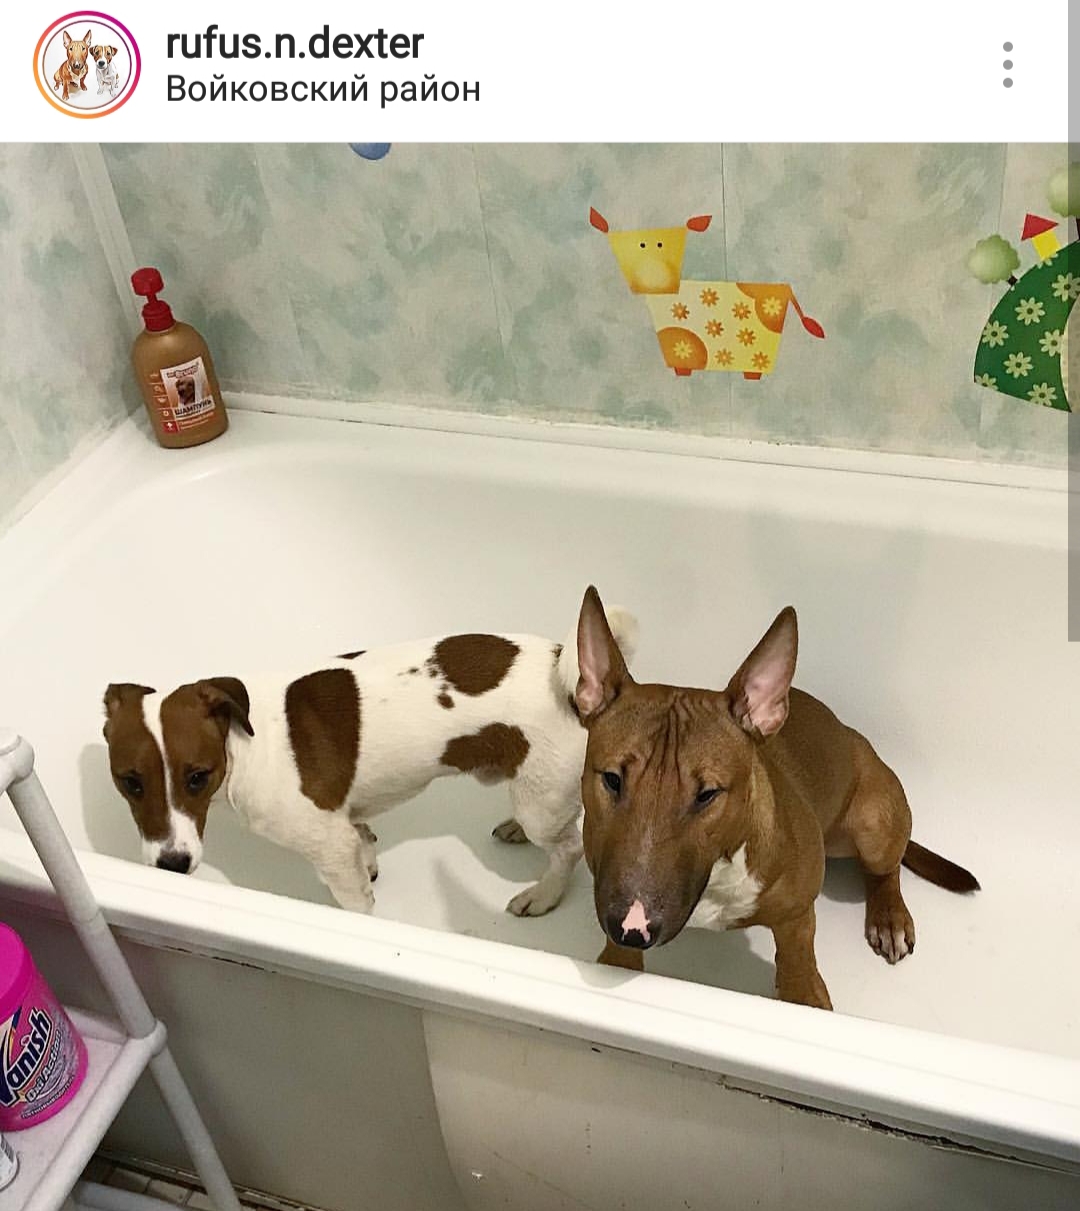 An English Bull Terrier and Jack Russell Terrier sitting inside the bathtub